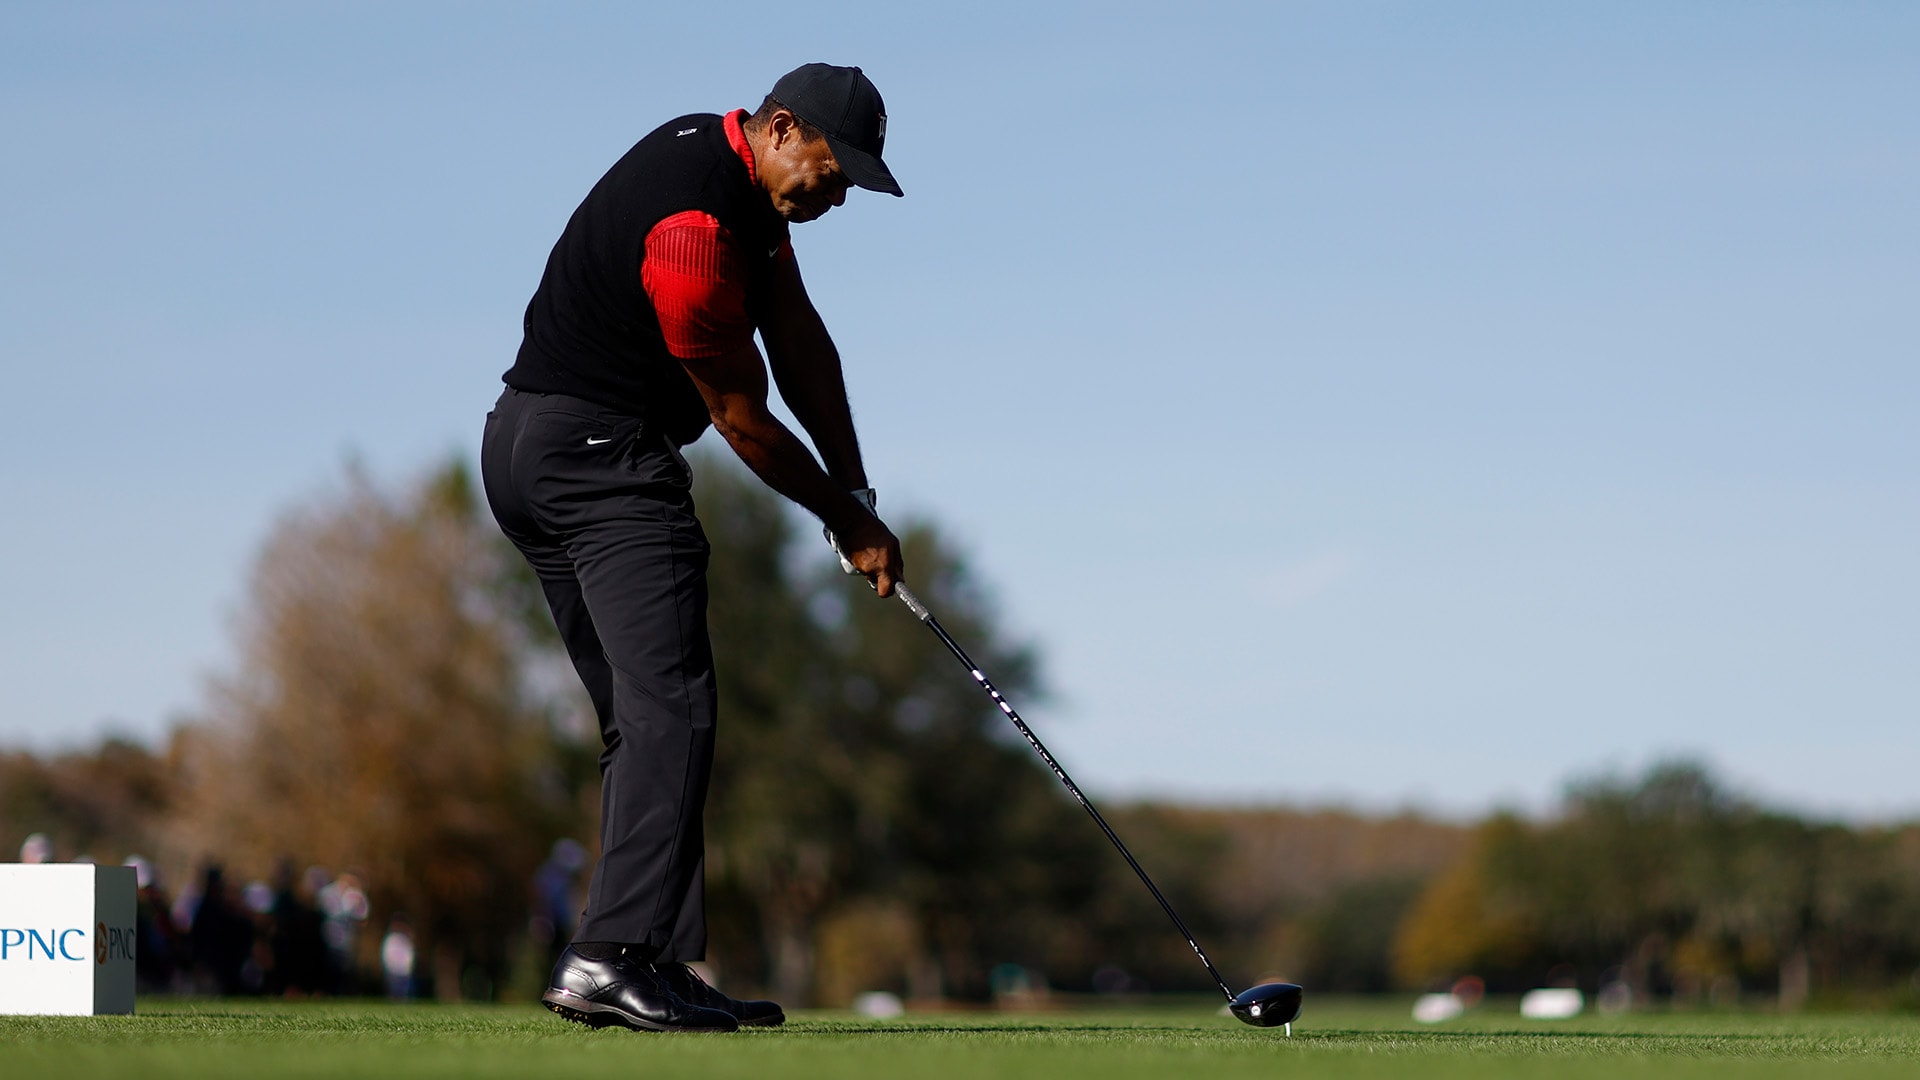 Despite injuries, Tiger Woods flashes power at PNC Championship